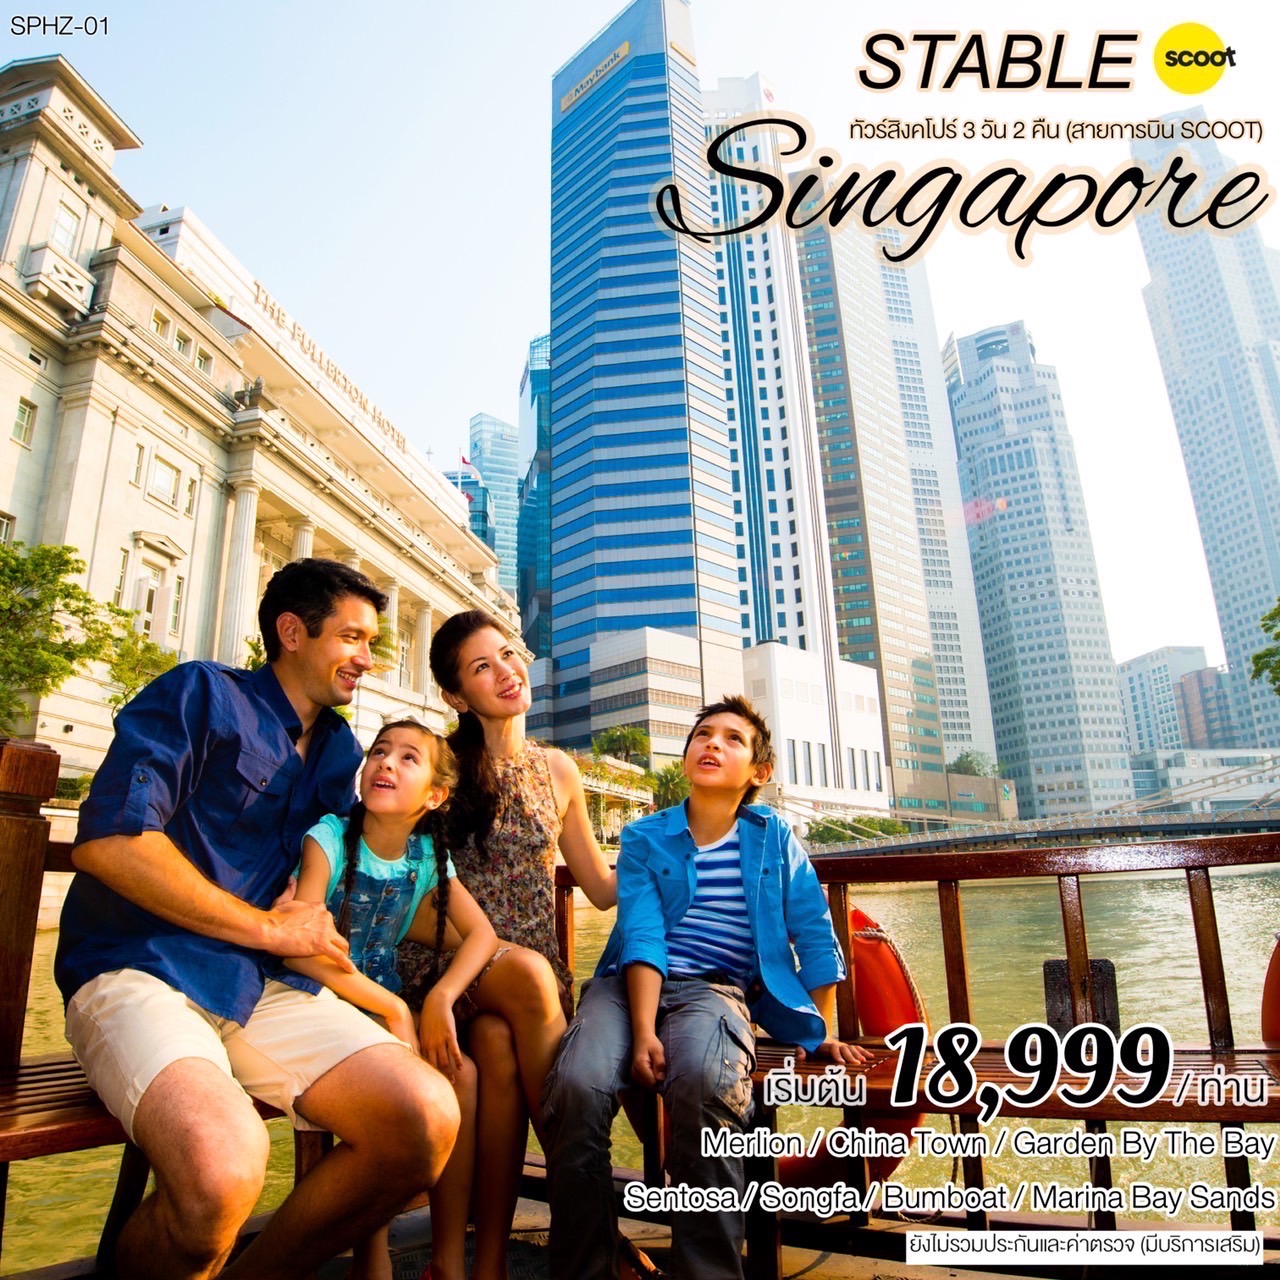 SPHZ-01.STABLE SINGAPORE 3D2N (TR) รูปที่ 1